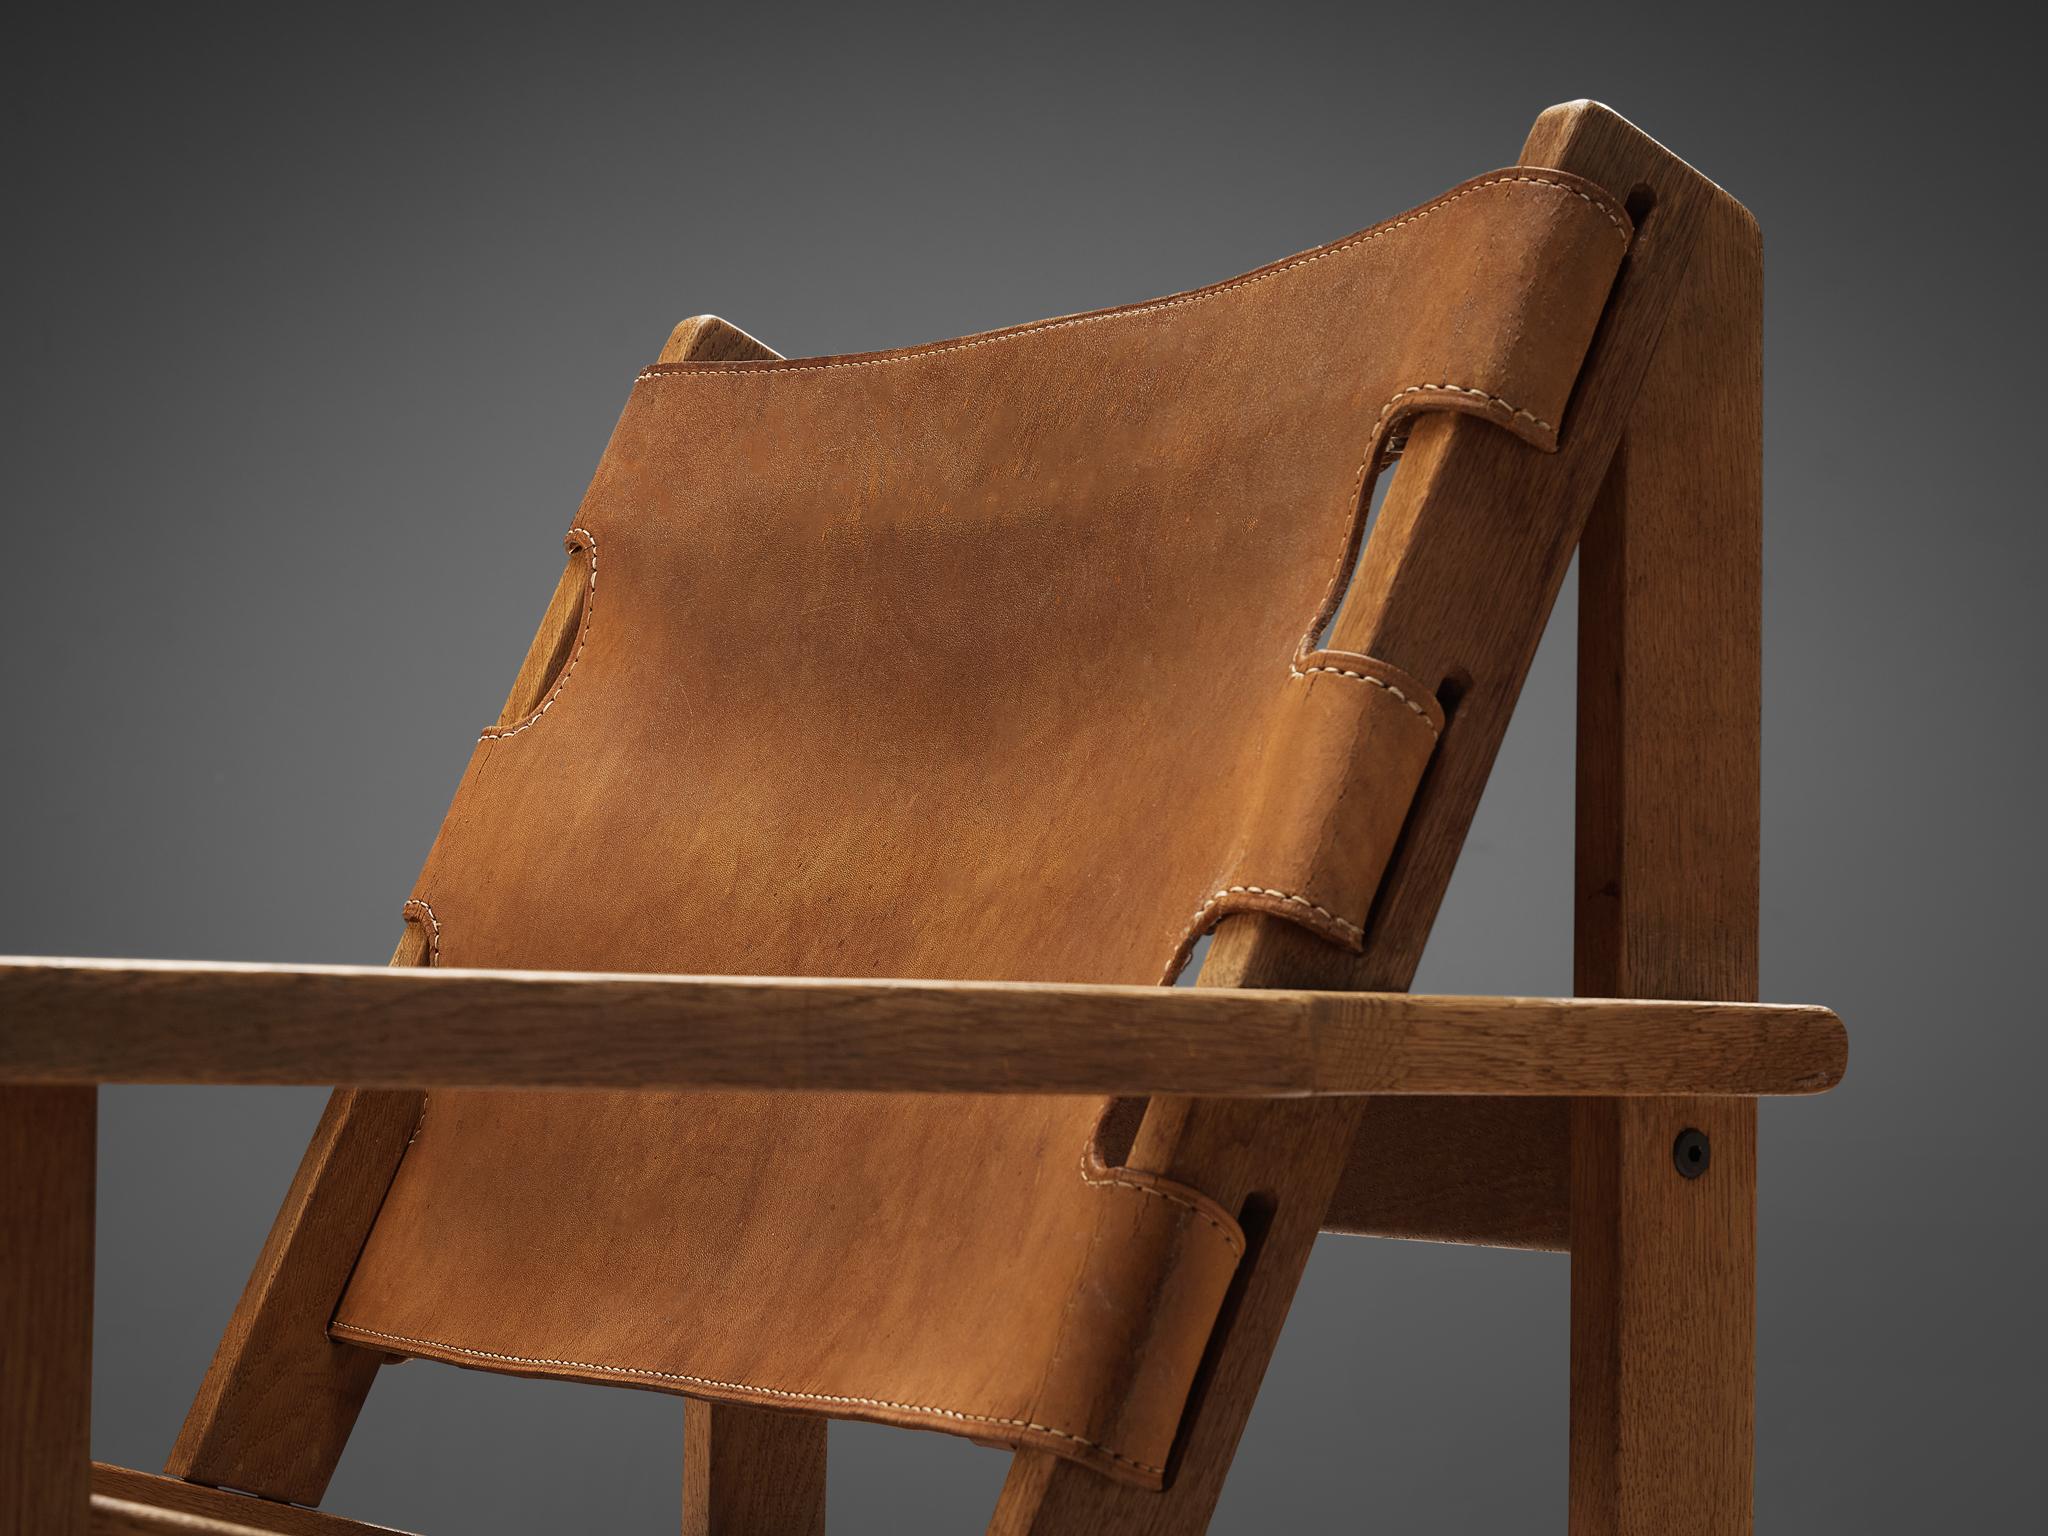  Kurt Østervig 'Hunting' Lounge Chair in Cognac Leather and Oak  For Sale 4